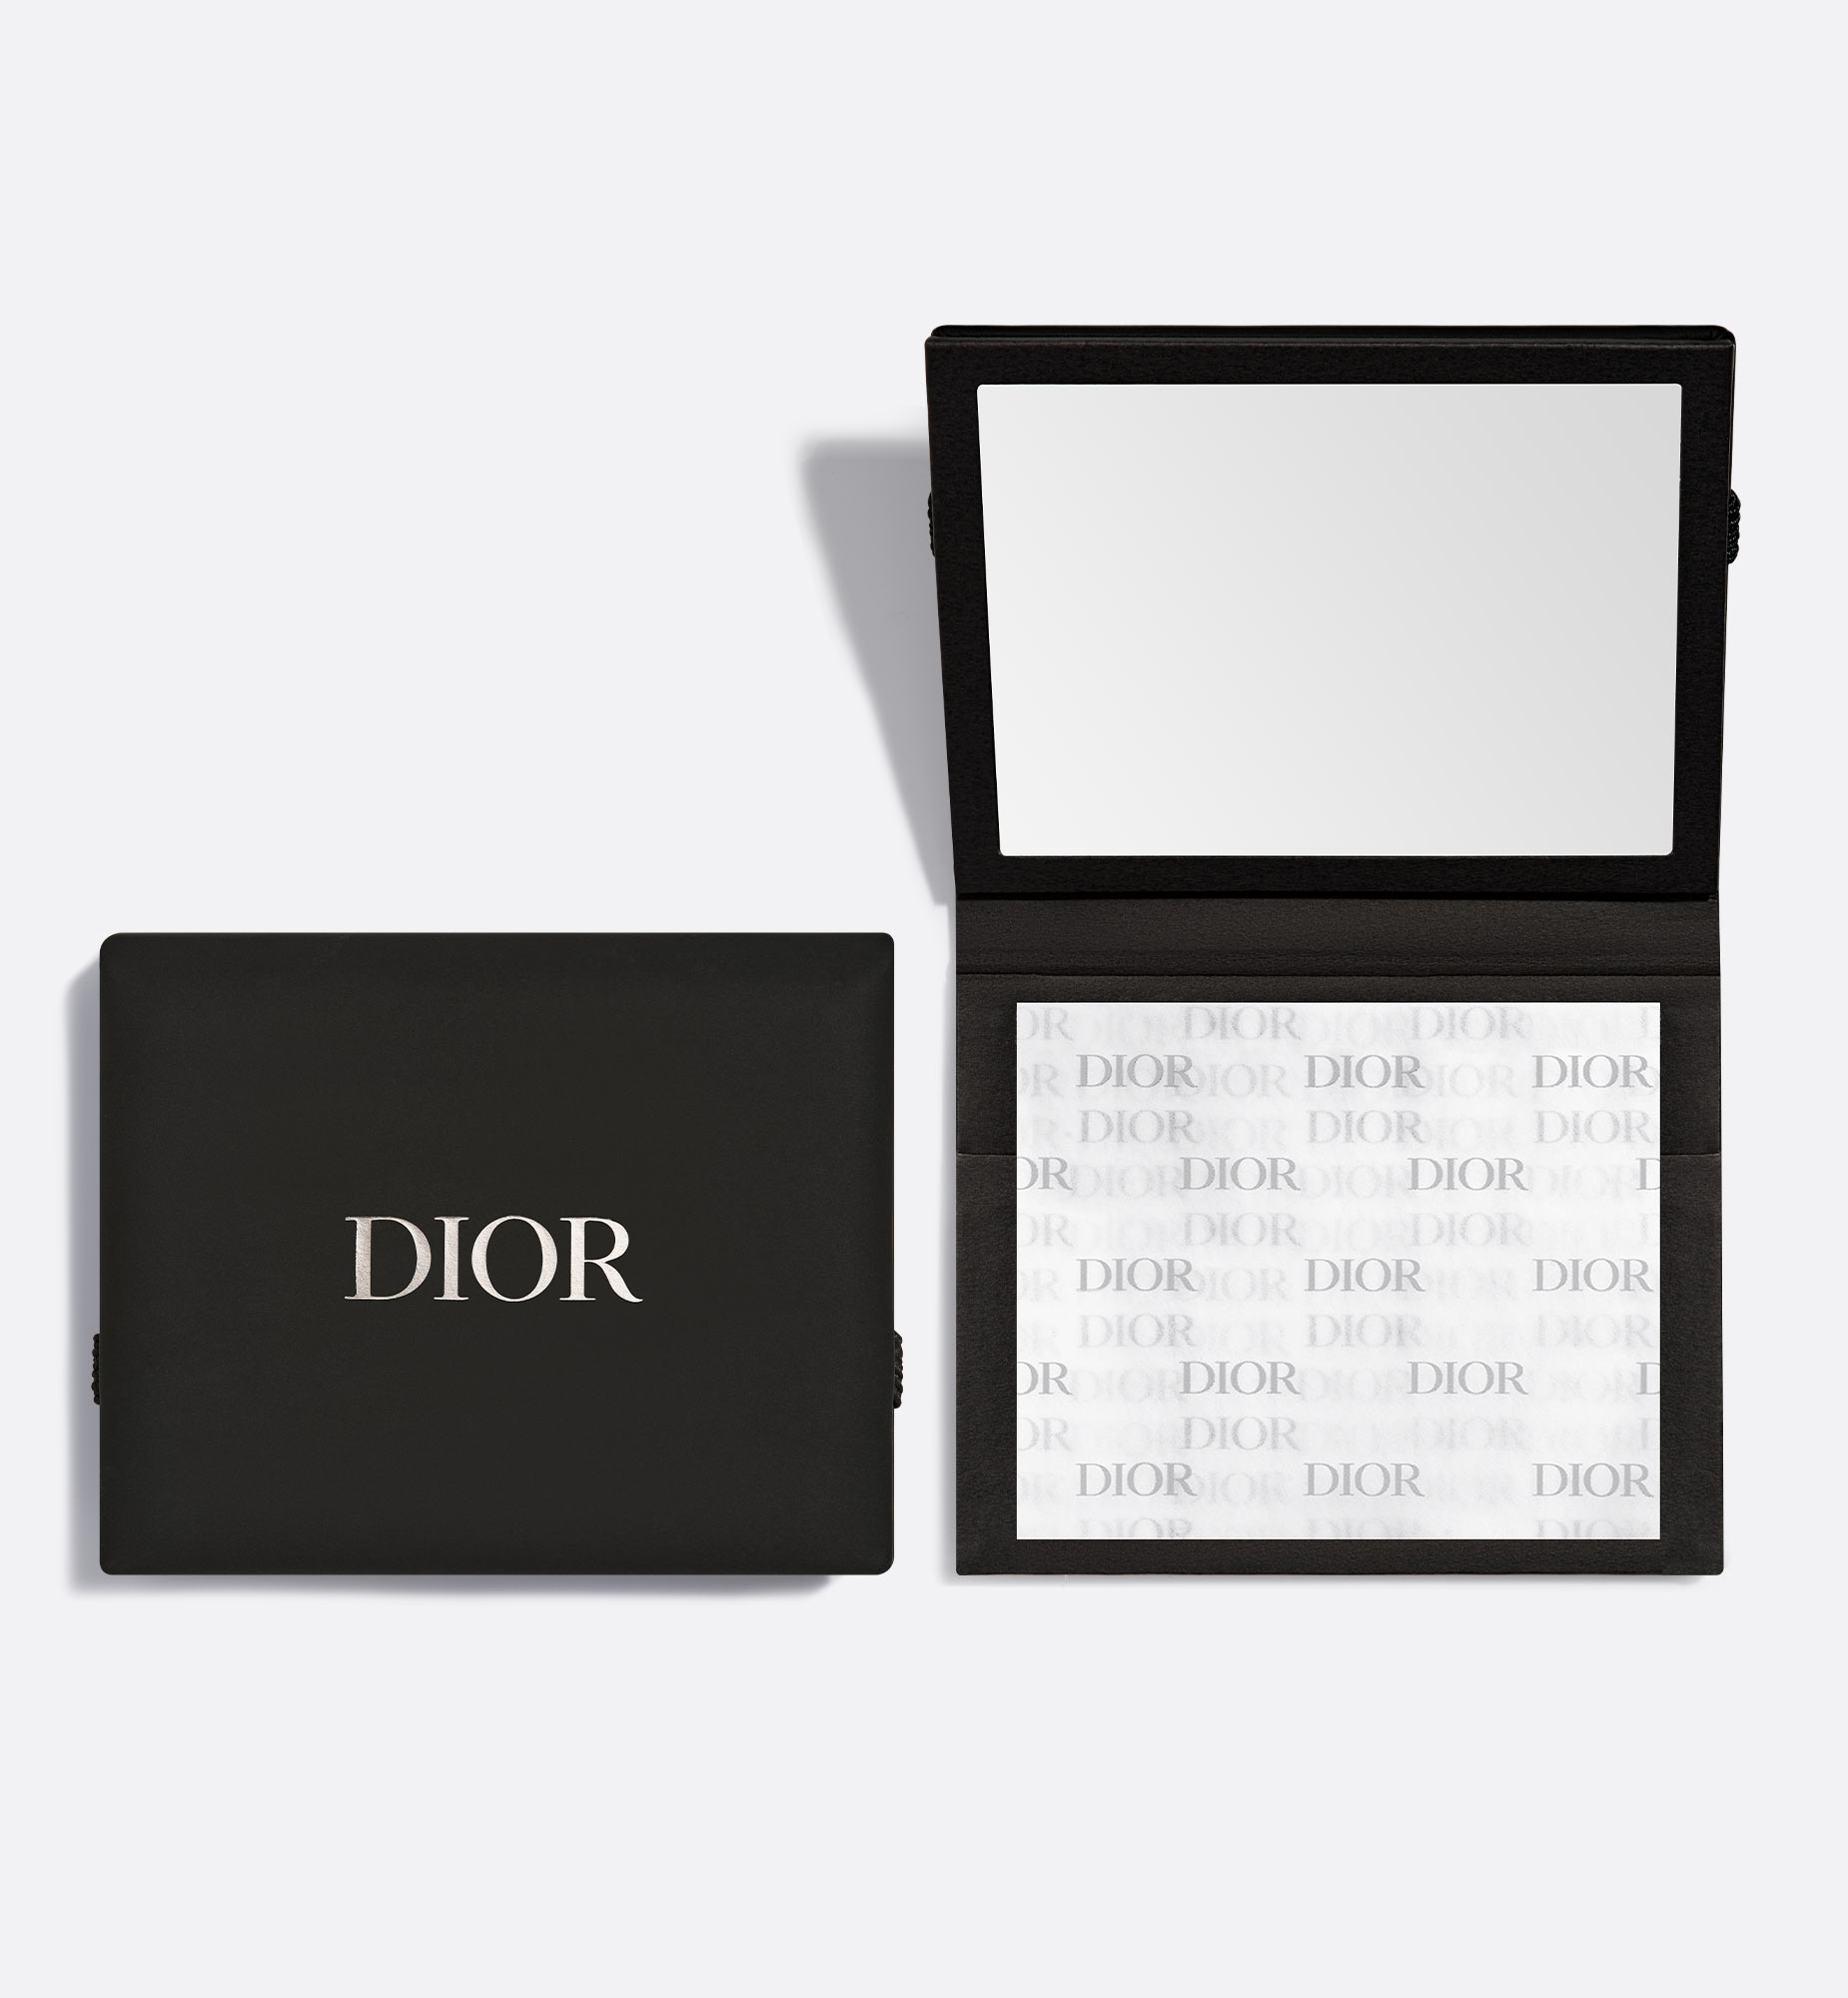 Dior 100 Sheets Of Blotting Paper In Neutral